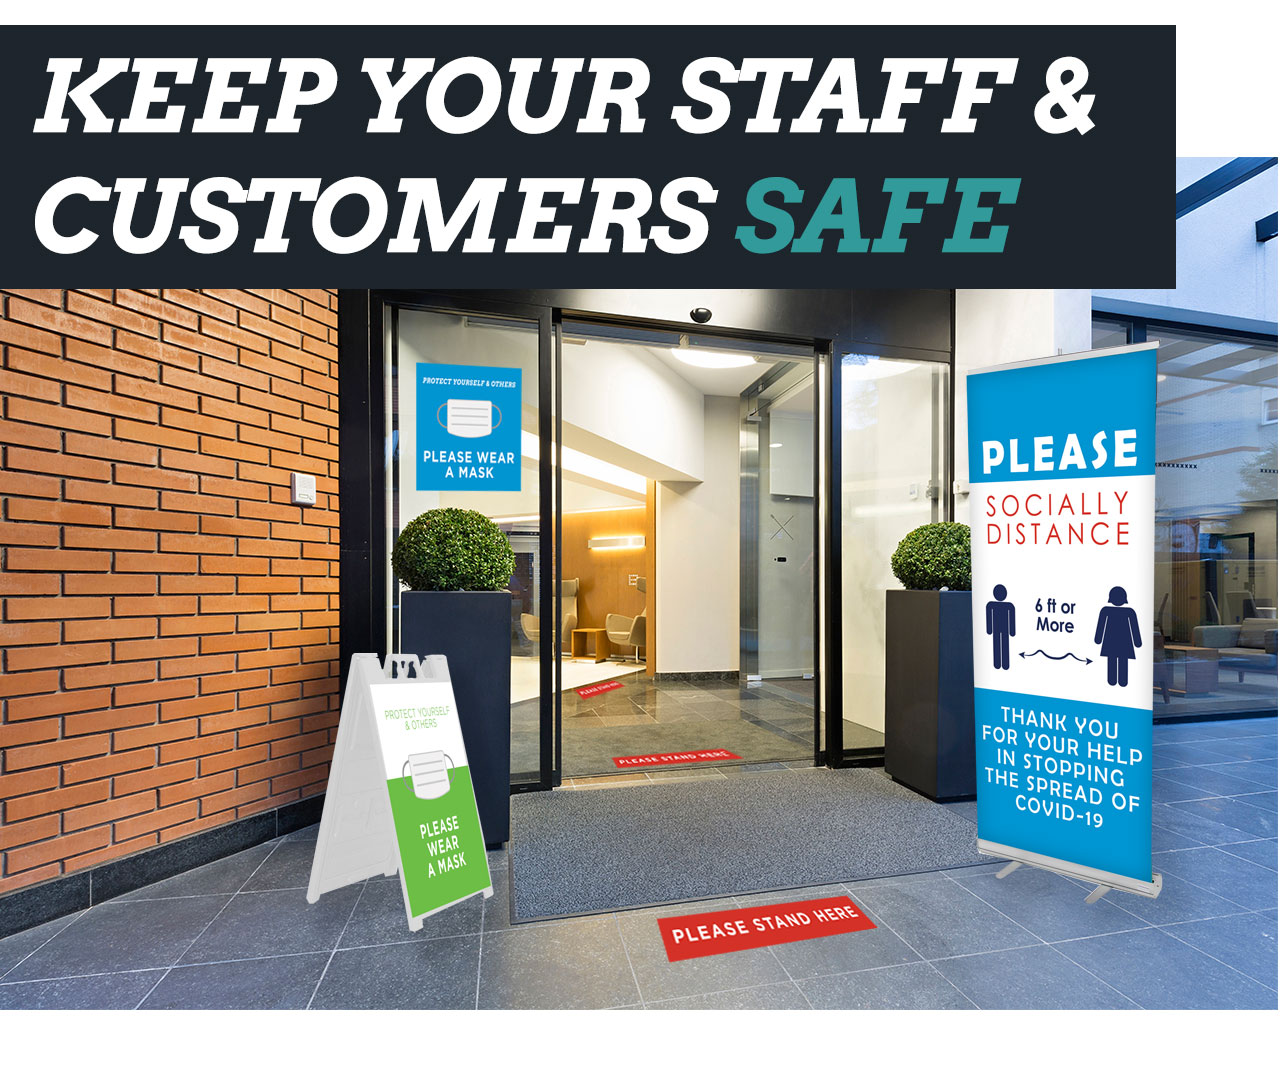 KEEP YOUR STAFF AND CUSTOMERS SAFE